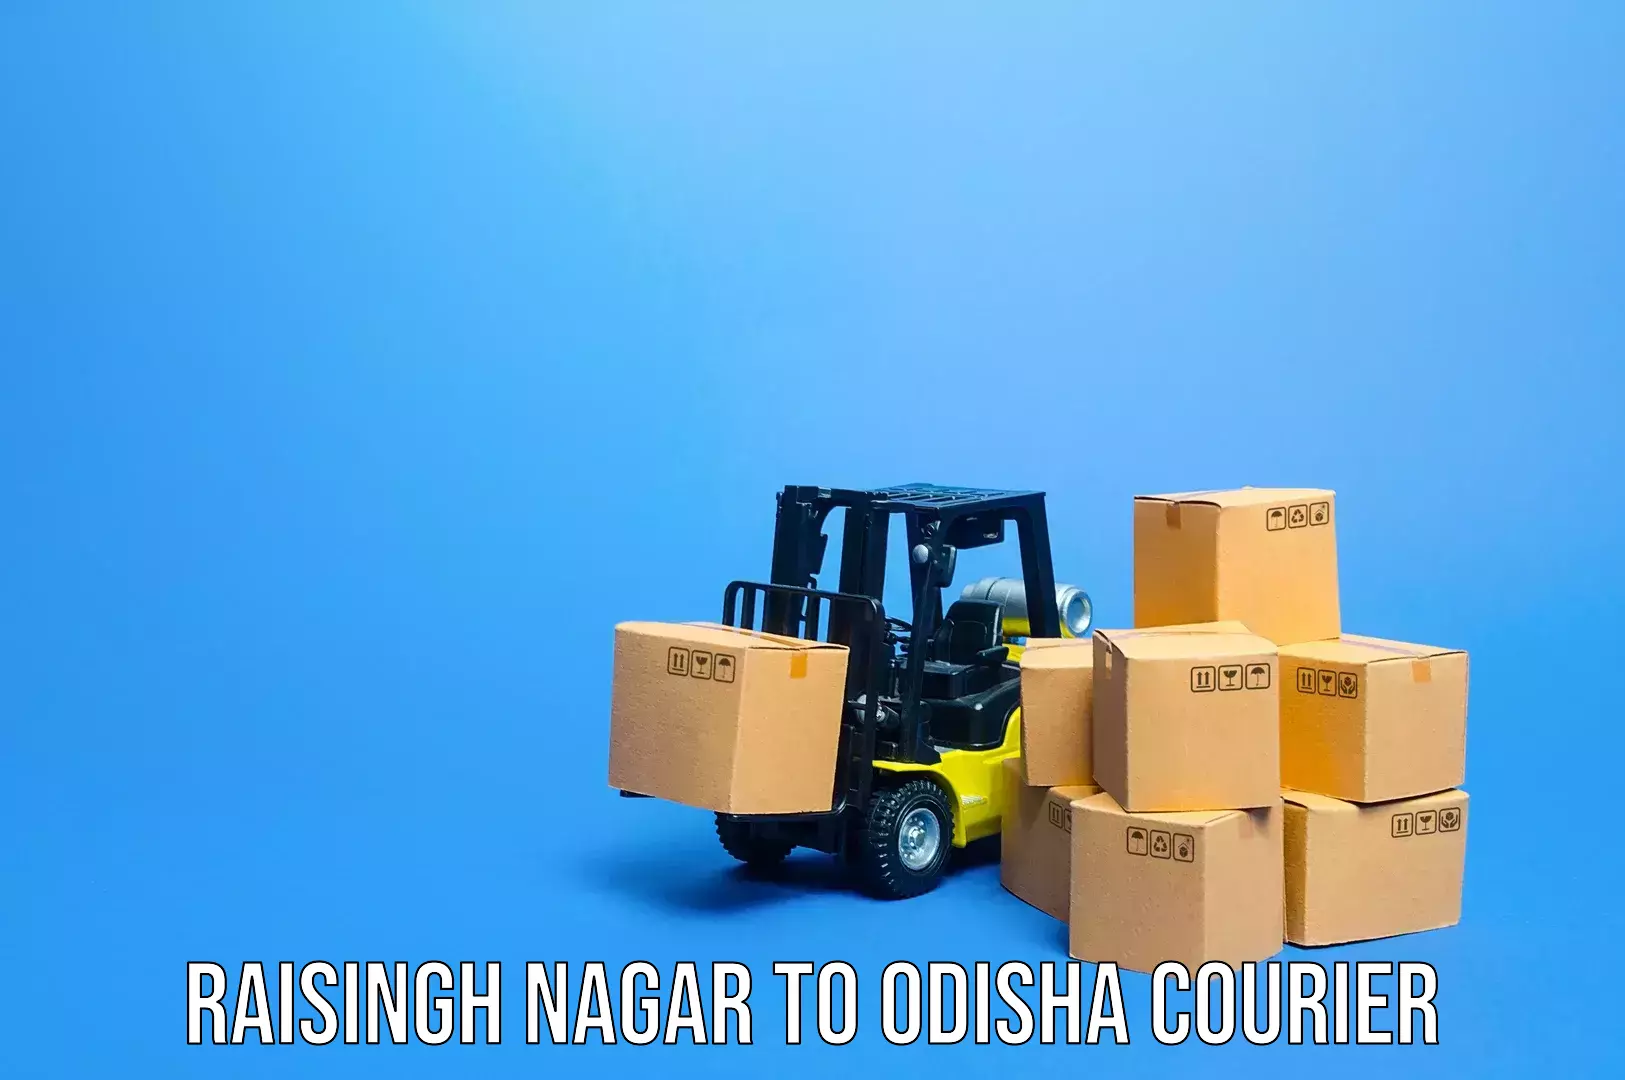 Luggage storage and delivery in Raisingh Nagar to Cuttack